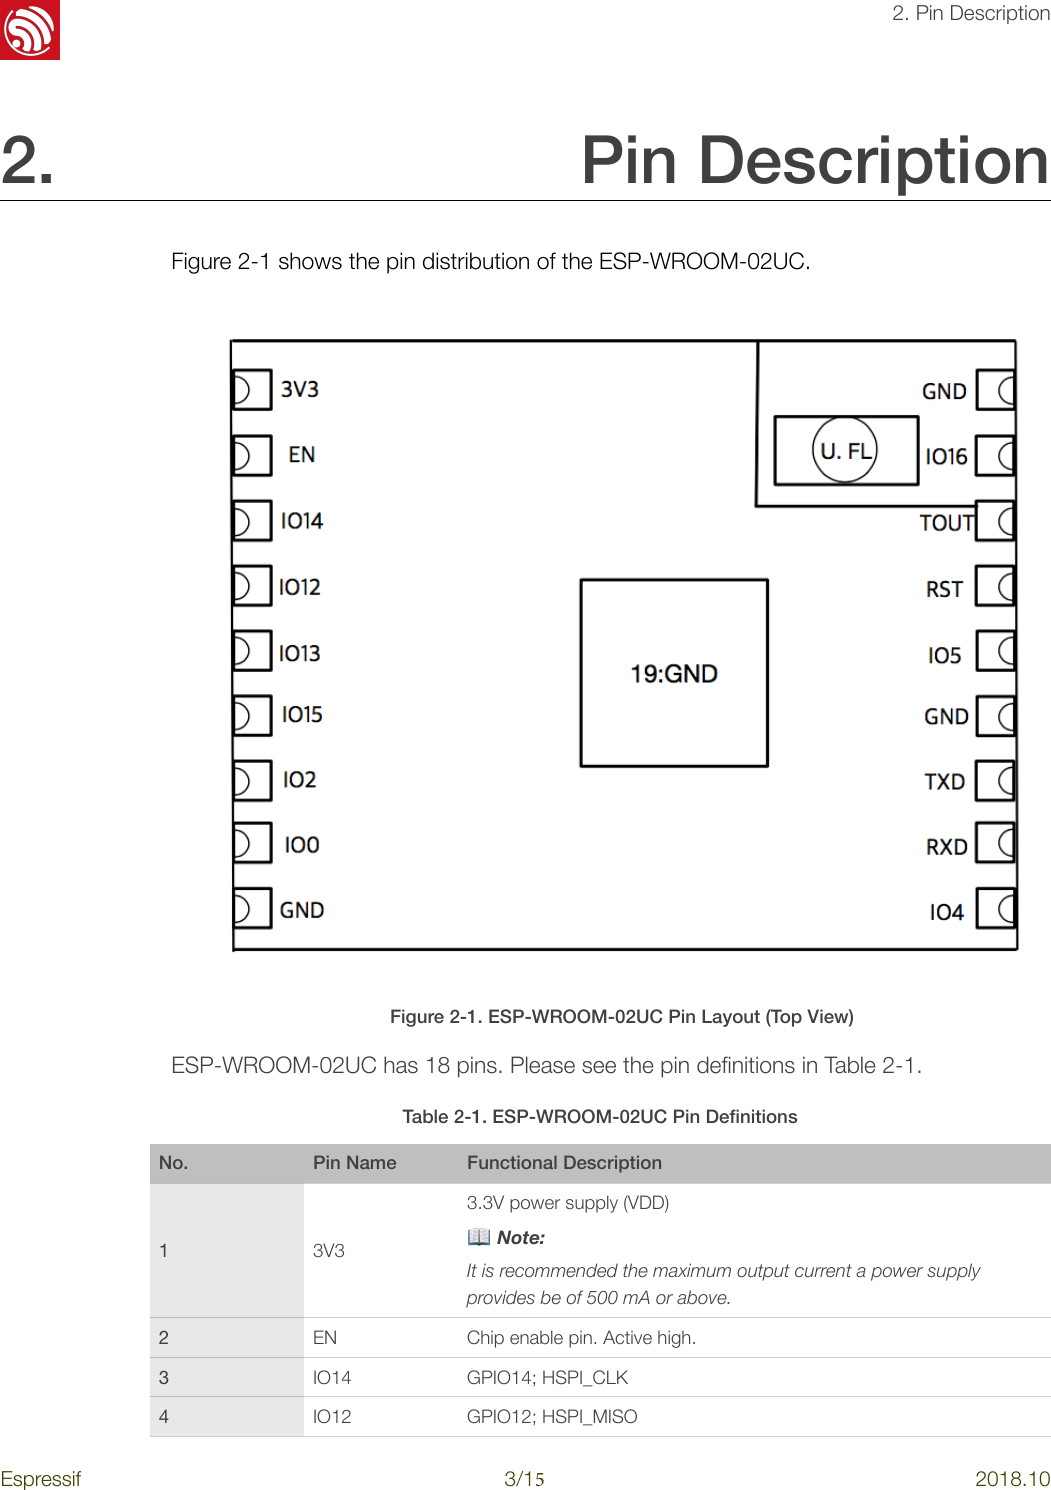 !2. Pin Description2. Pin Description !Table 2-1. ESP-WROOM-02UC Pin DeﬁnitionsNo.Pin NameFunctional Description13V33.3V power supply (VDD) 📖 Note: It is recommended the maximum output current a power supply provides be of 500 mA or above.2ENChip enable pin. Active high.3IO14GPIO14; HSPI_CLK4IO12GPIO12; HSPI_MISOEspressif!3/!152018.10Figure 2-1 shows the pin distribution of the ESP-WROOM-02UC. Figure 2-1. ESP-WROOM-02UC Pin Layout (Top View) ESP-WROOM-02UC has 18 pins. Please see the pin deﬁnitions in Table 2-1. 